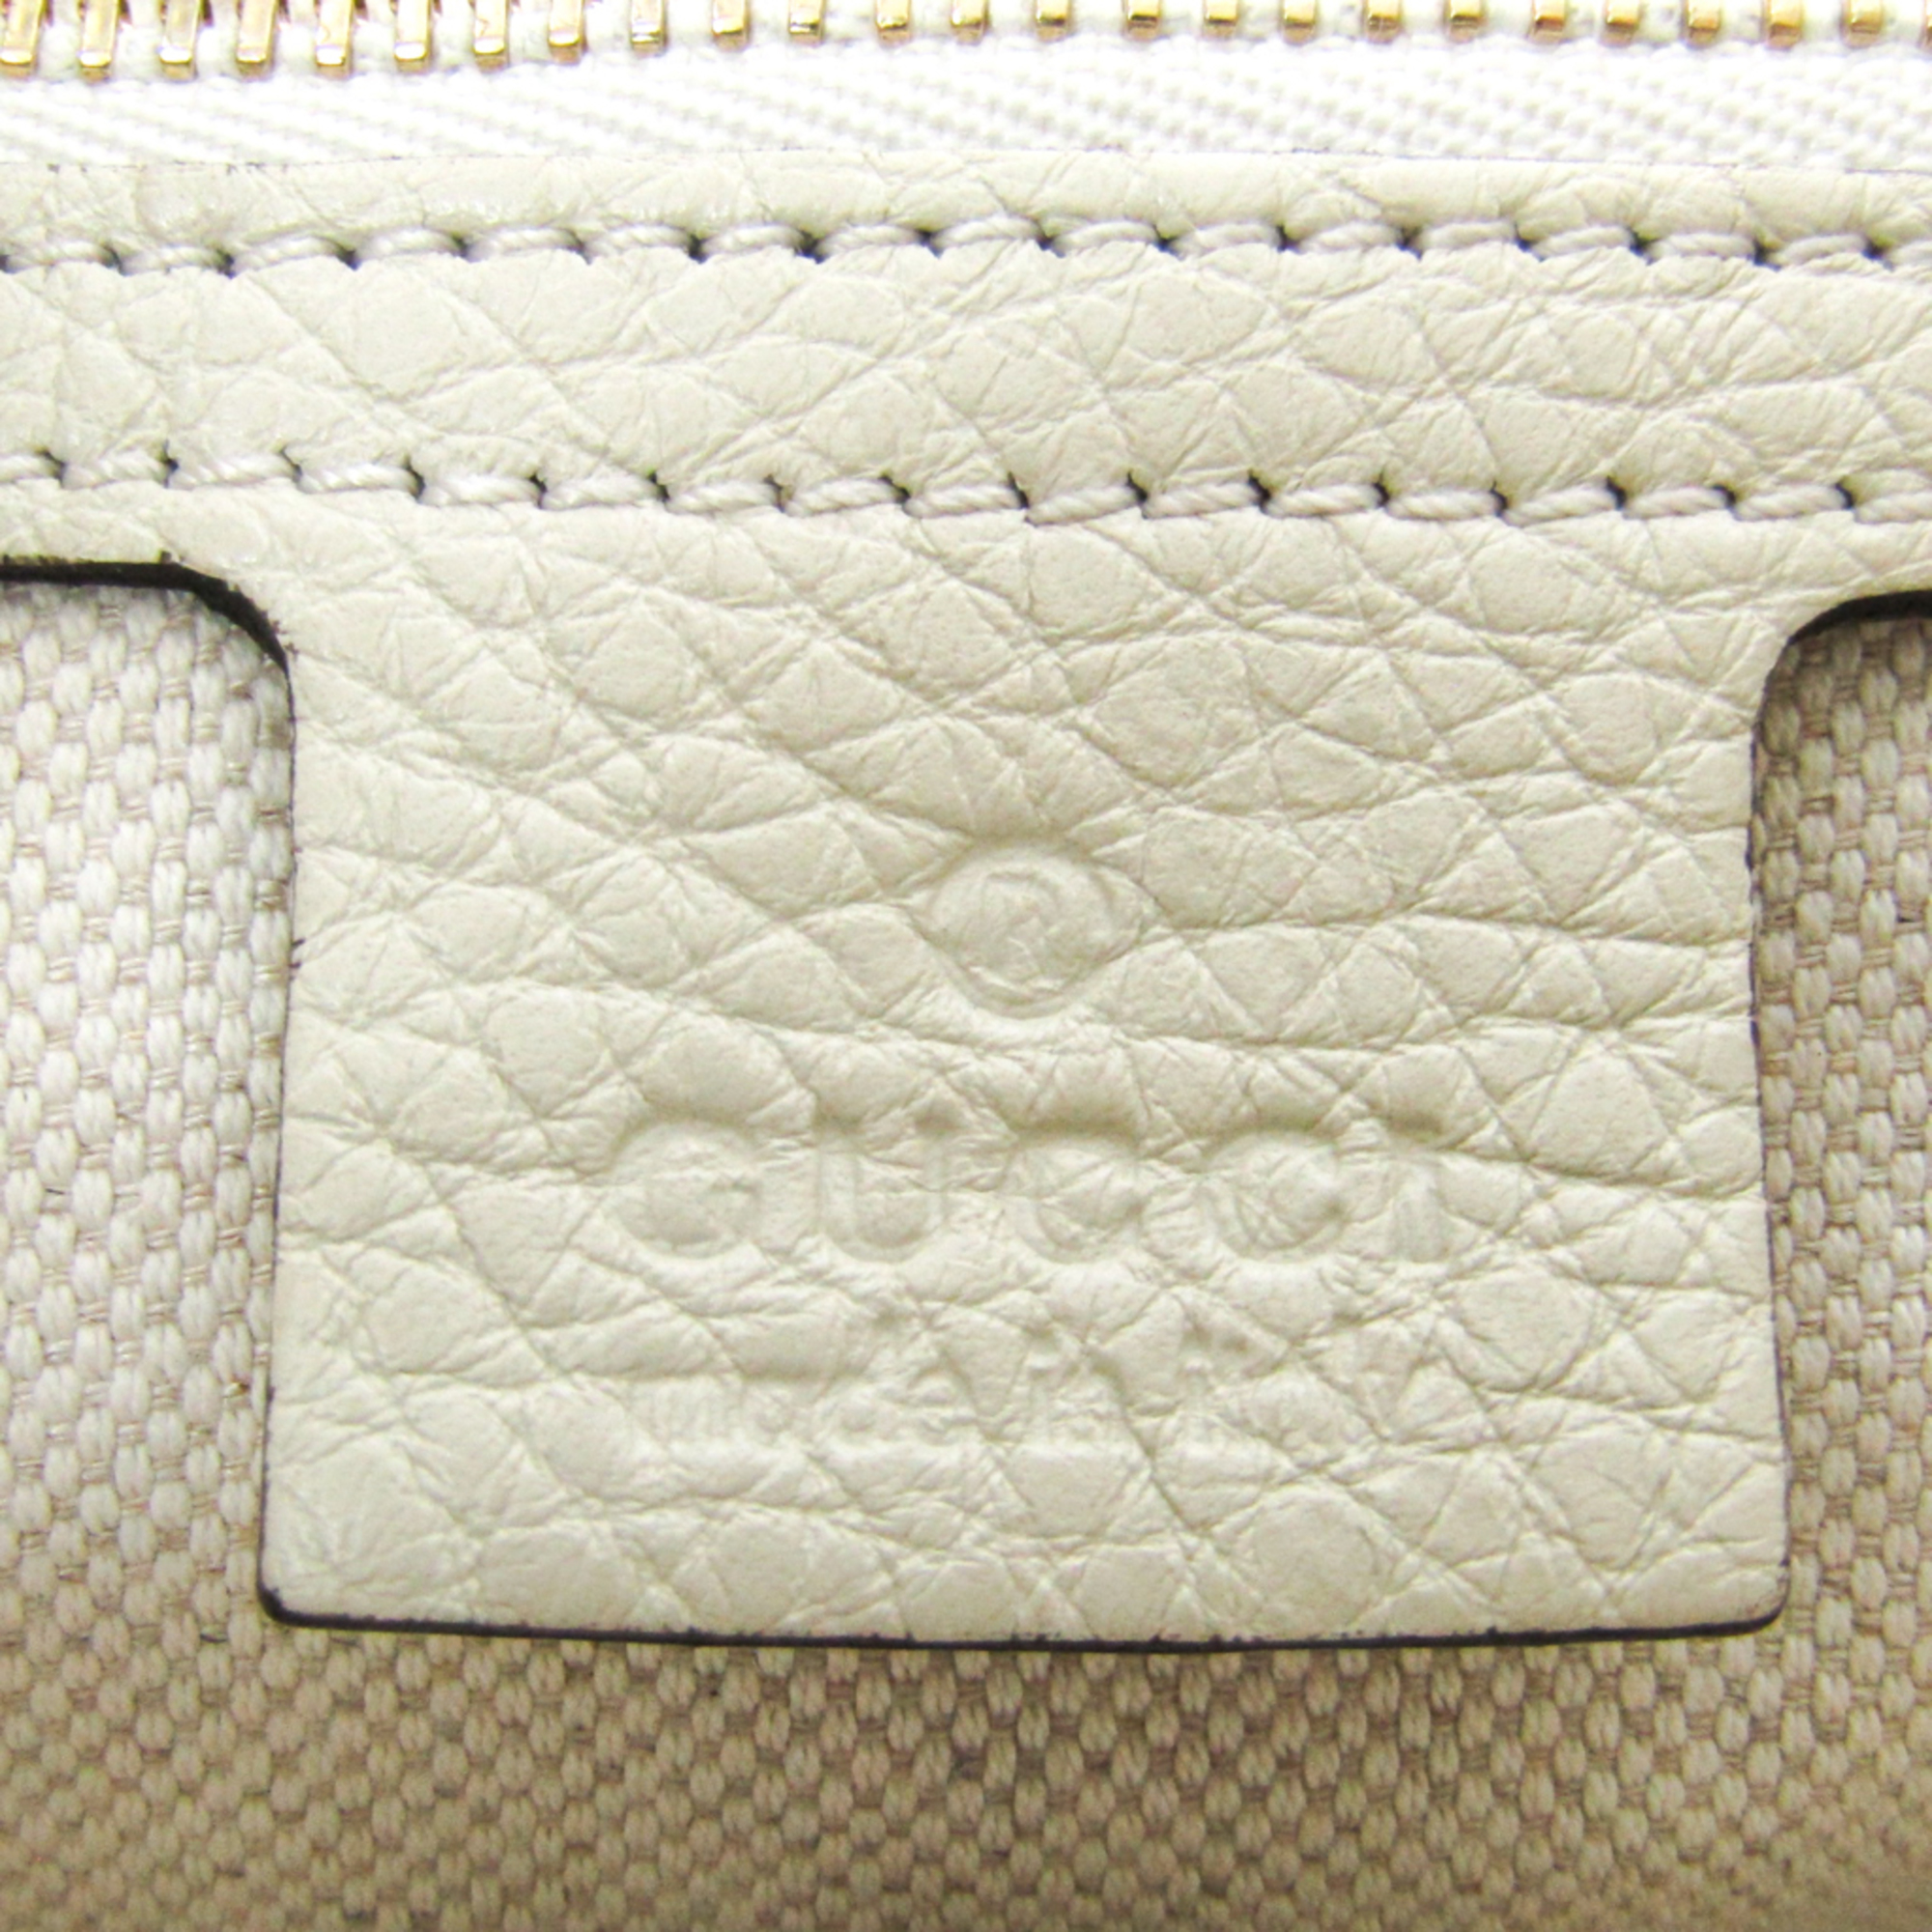 Gucci New Jackie 277520 Women's Leather Shoulder Bag White